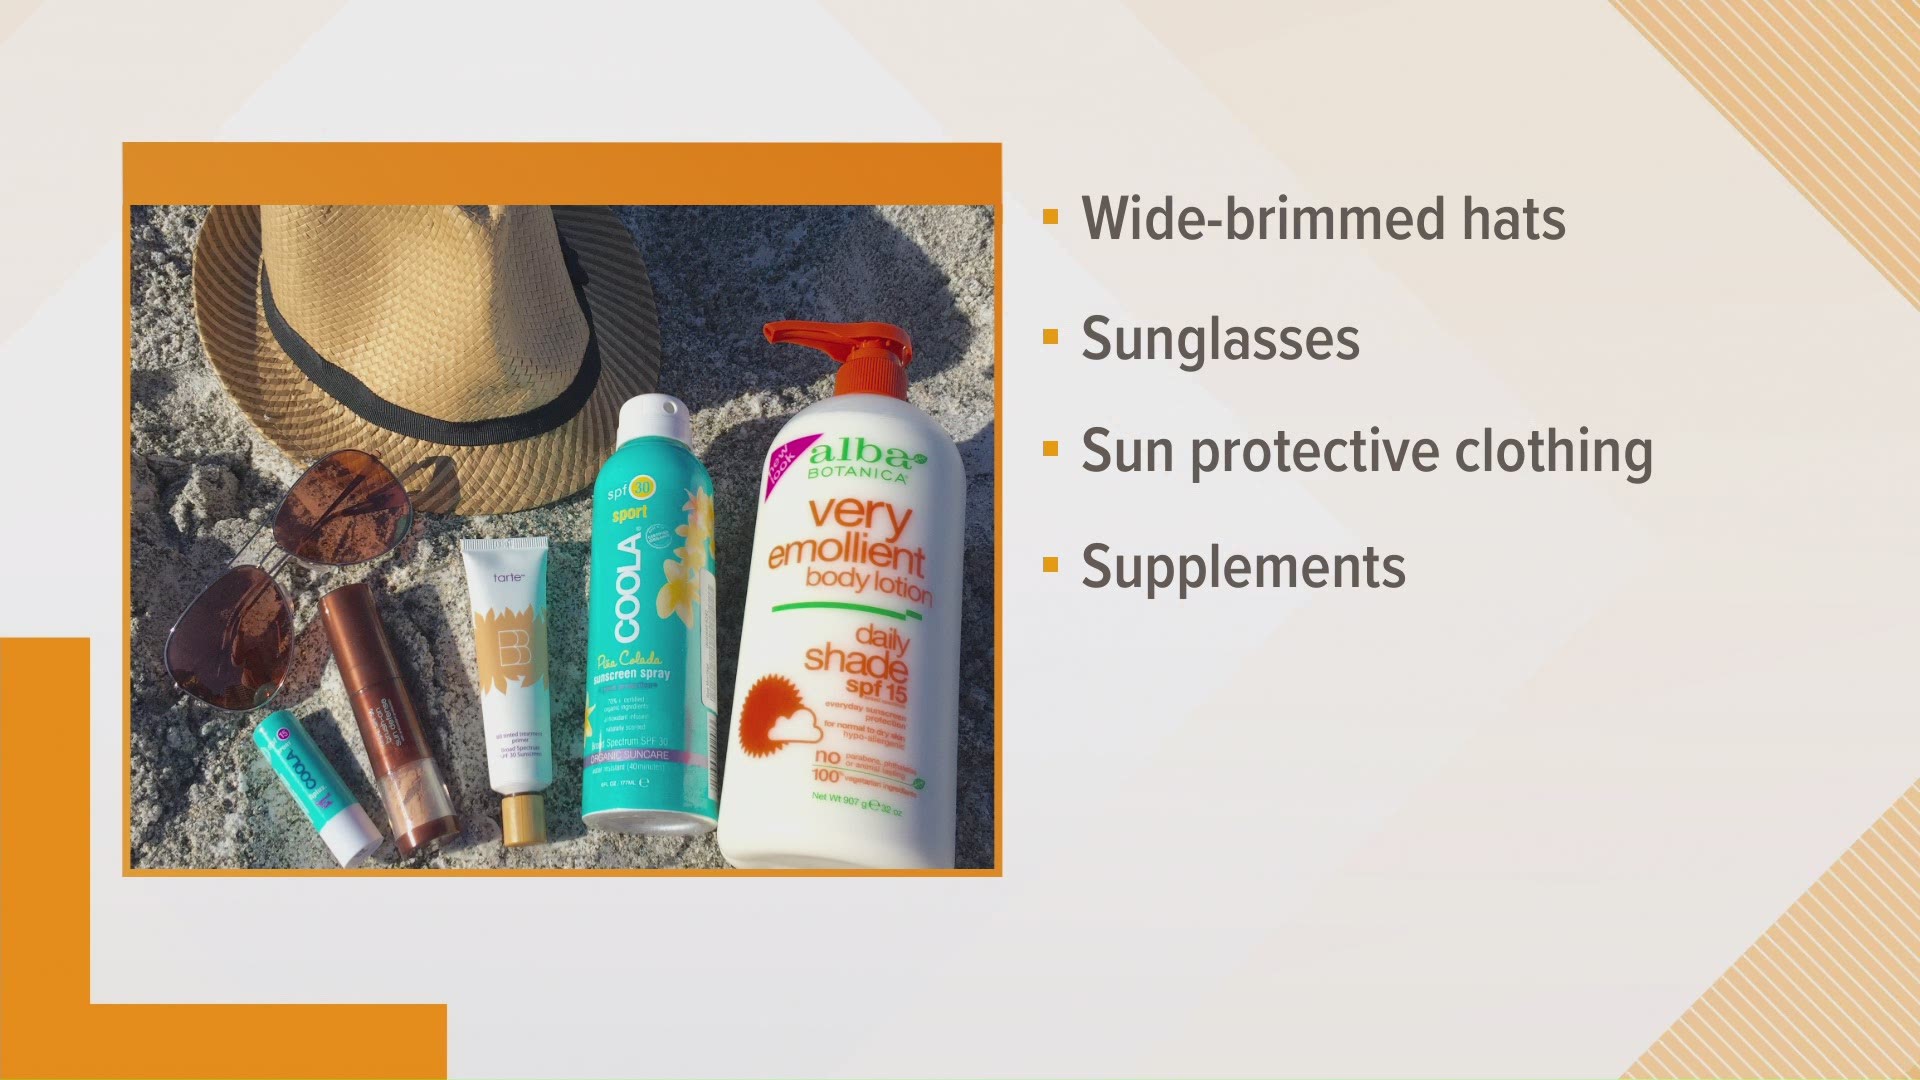 With summer just around the corner, protecting your skin is crucial. Sunscreen is a given, but there are other ways you can avoid damaging UV rays.